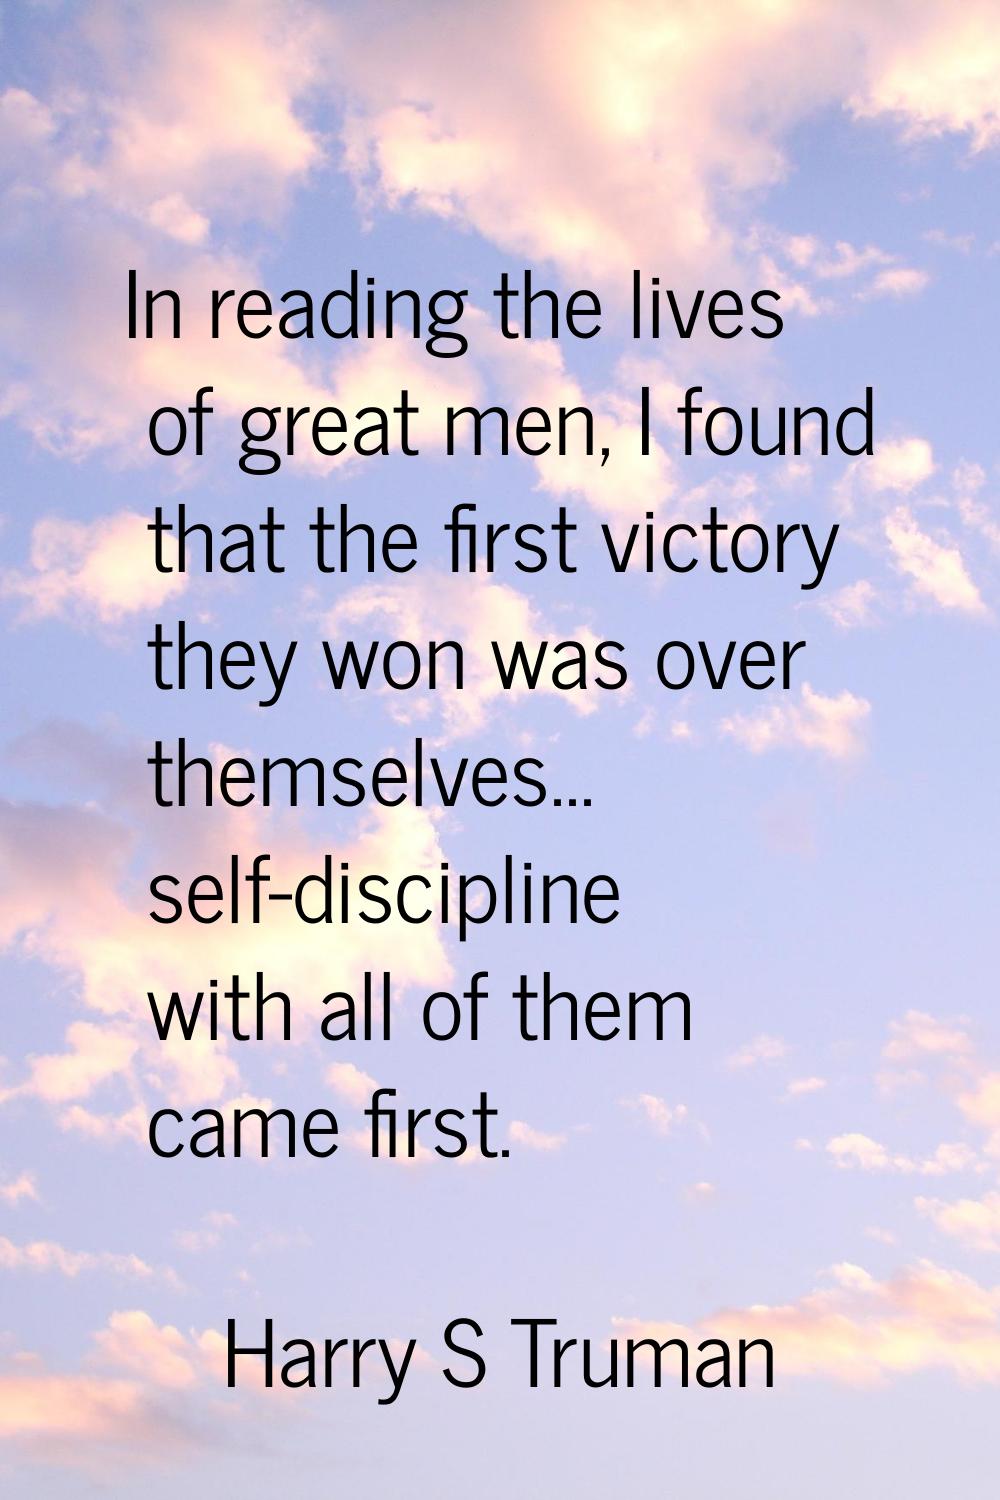 In reading the lives of great men, I found that the first victory they won was over themselves... s